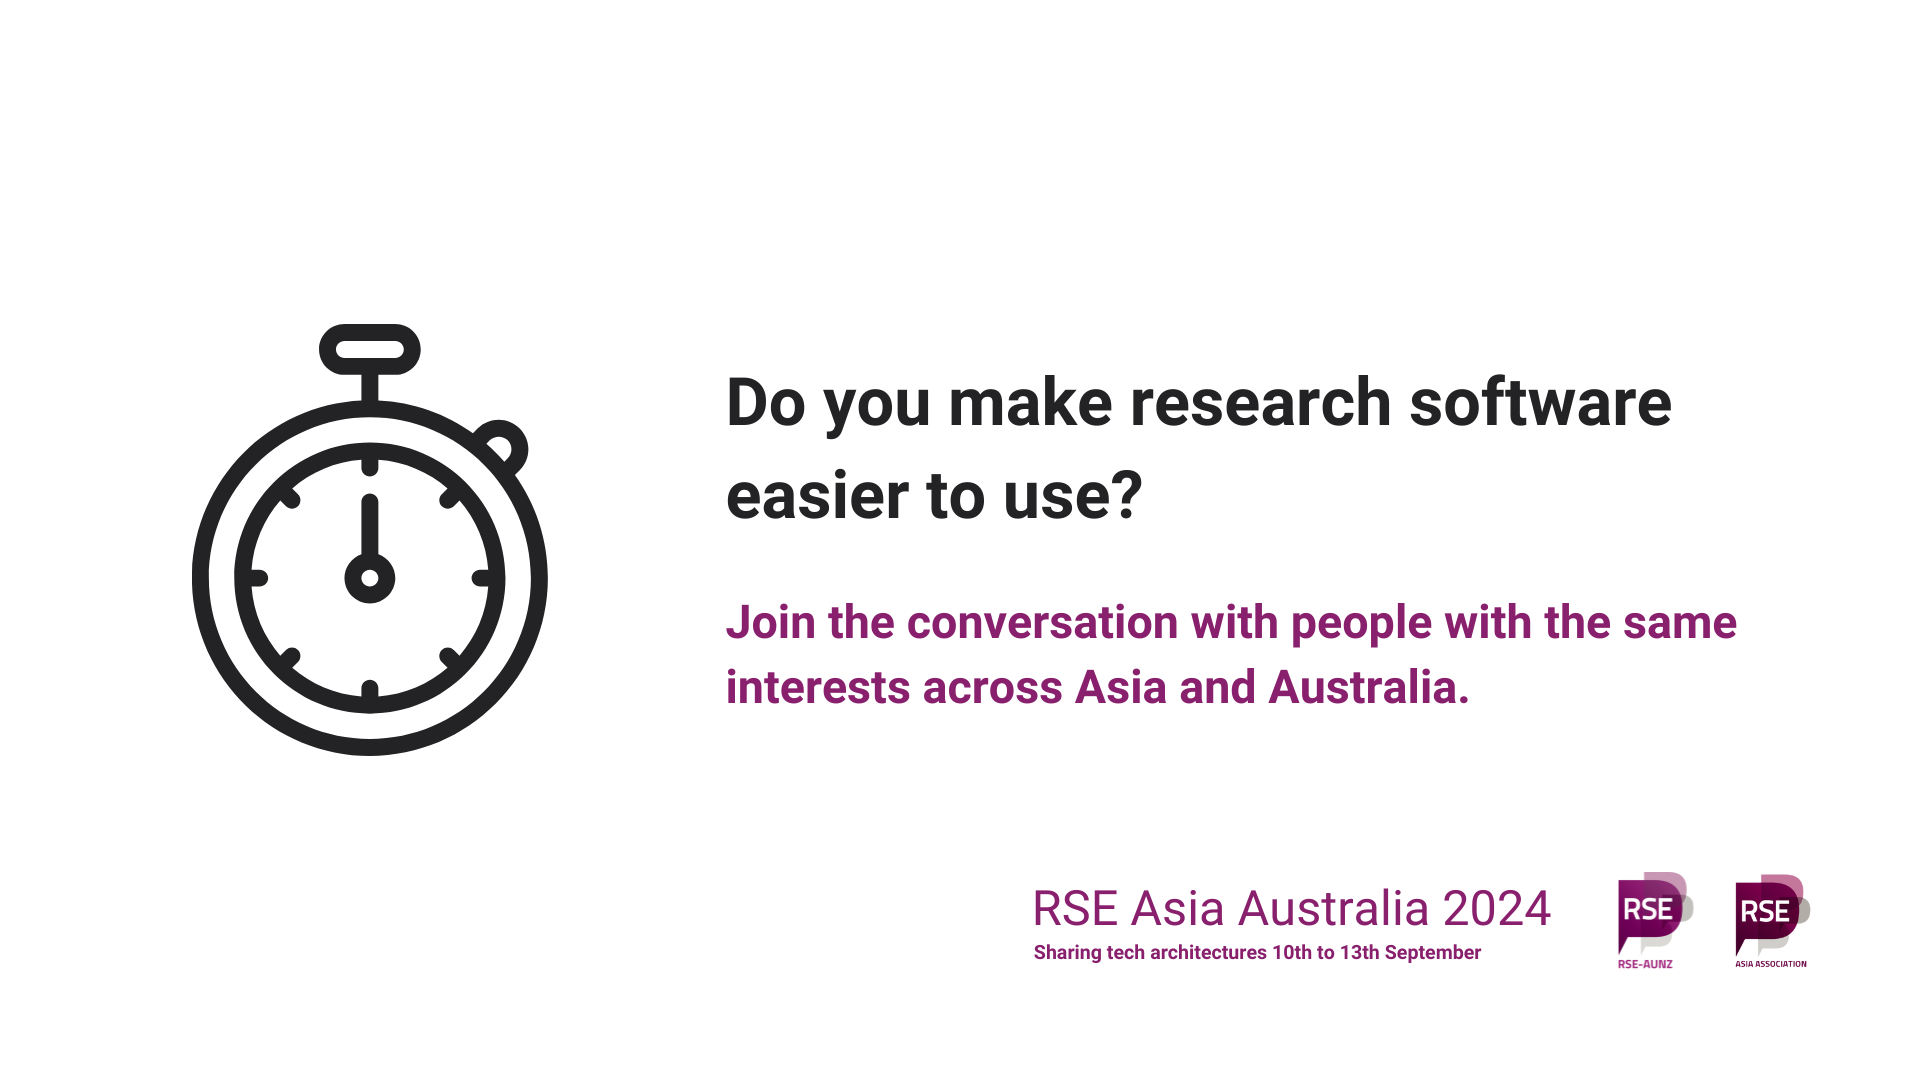 Stopwatch. Do you make research software easier to use? Join the conversation with people with the same interests across Asia and Australia. RSE Asia Australia 2024. Sharing tech architectures. 10th to 13th September. Logos of RSE AUNZ and RSE Asia.